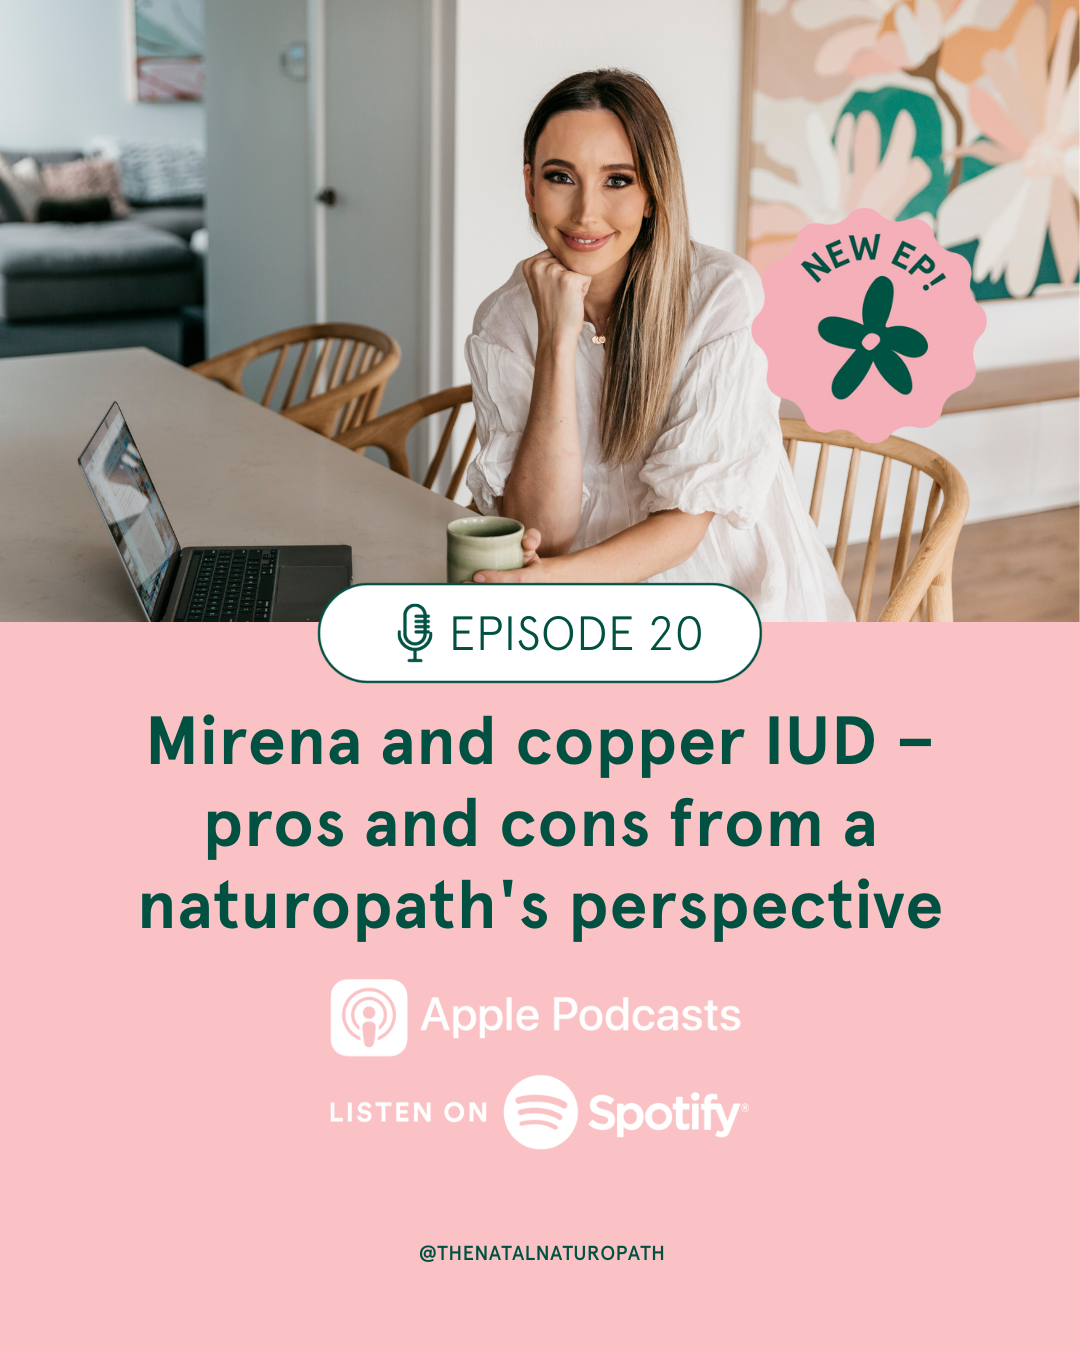 Mirena and copper IUD – pros and cons from a naturopath's perspective